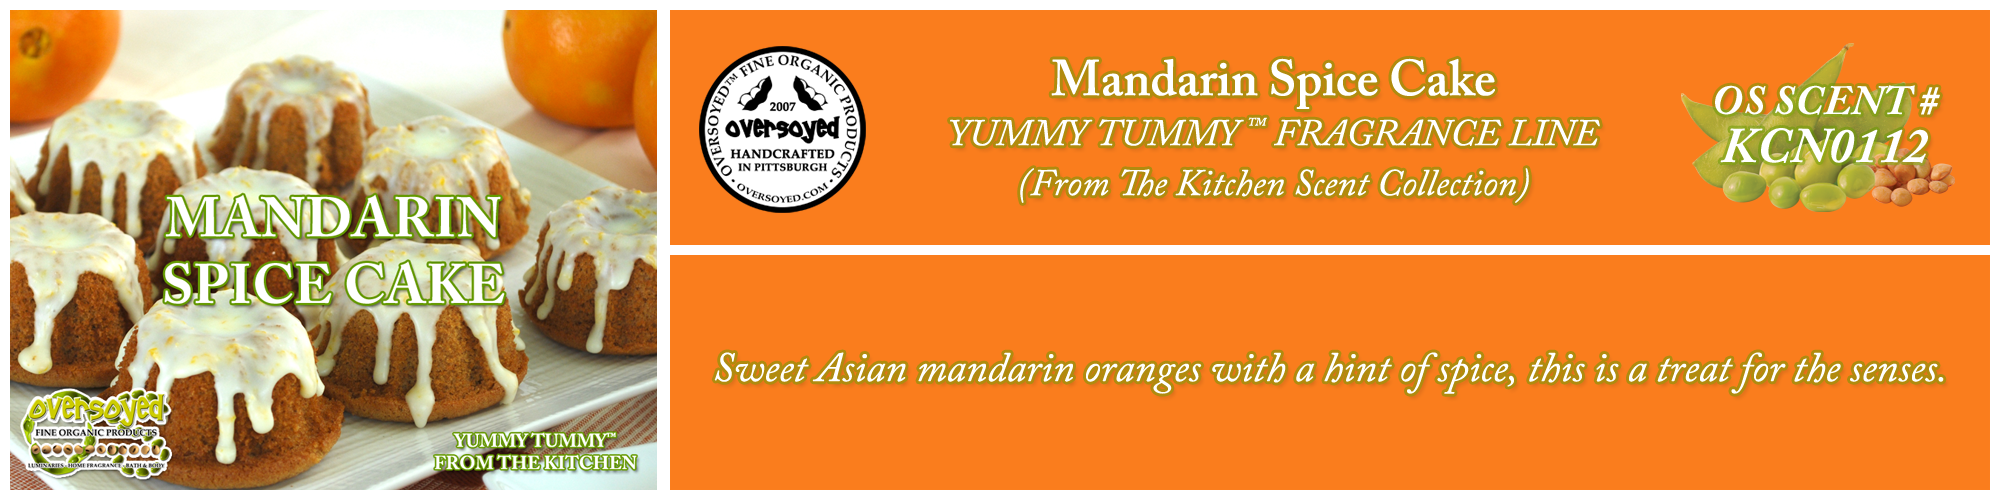 Mandarin Spice Cake Handcrafted Products Collection